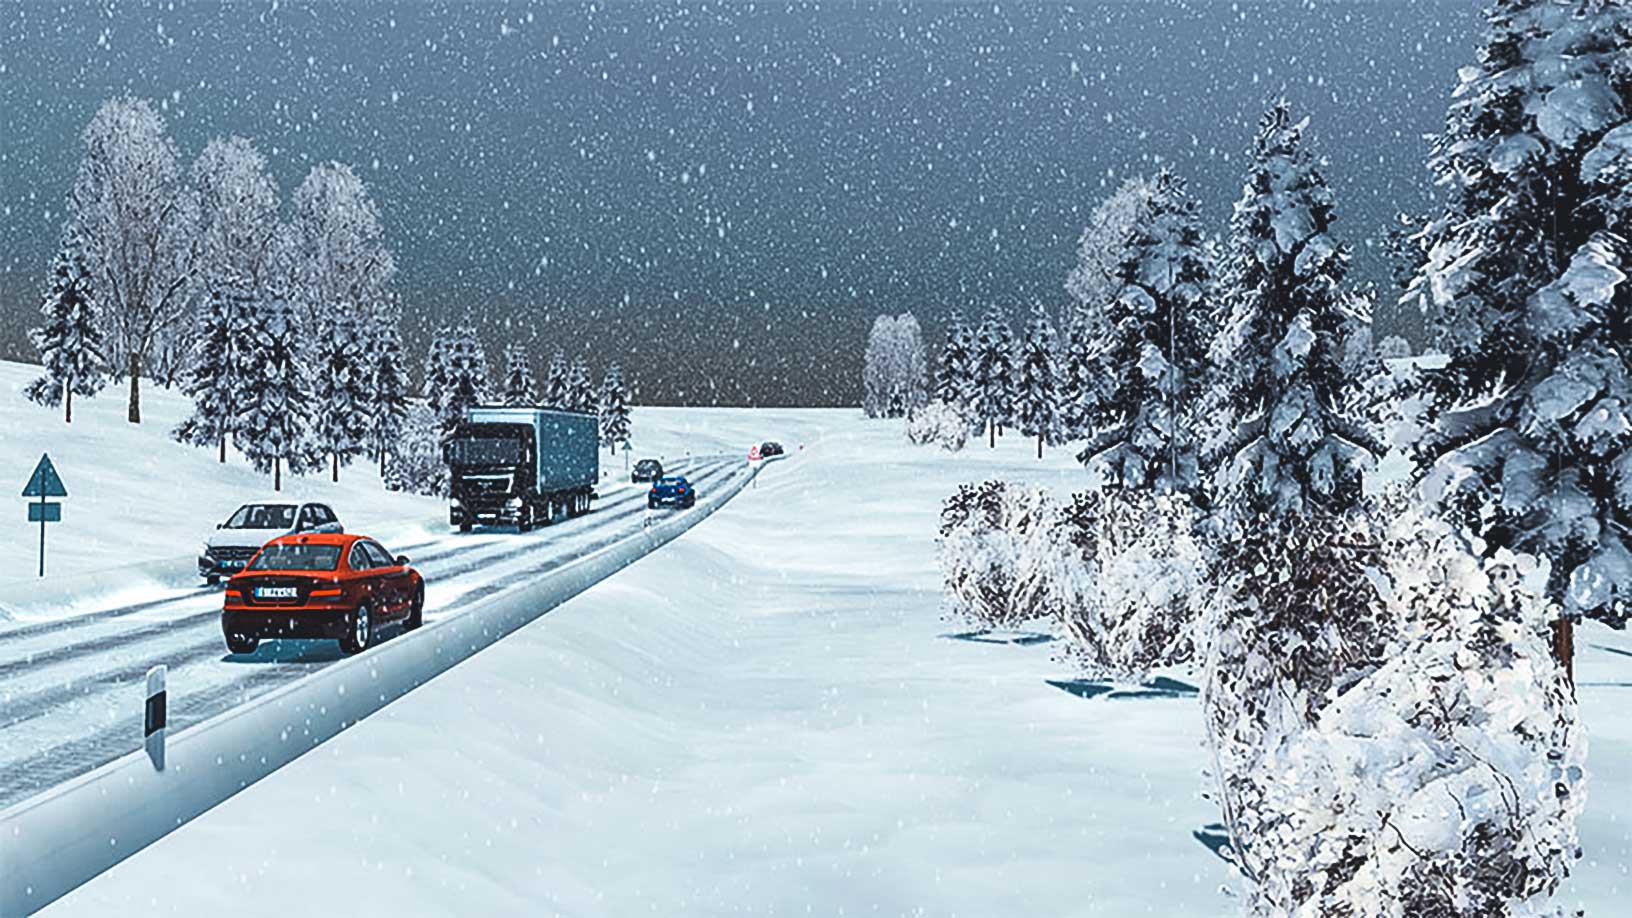 Simulation of vehicles driving in cold, snowy conditions 